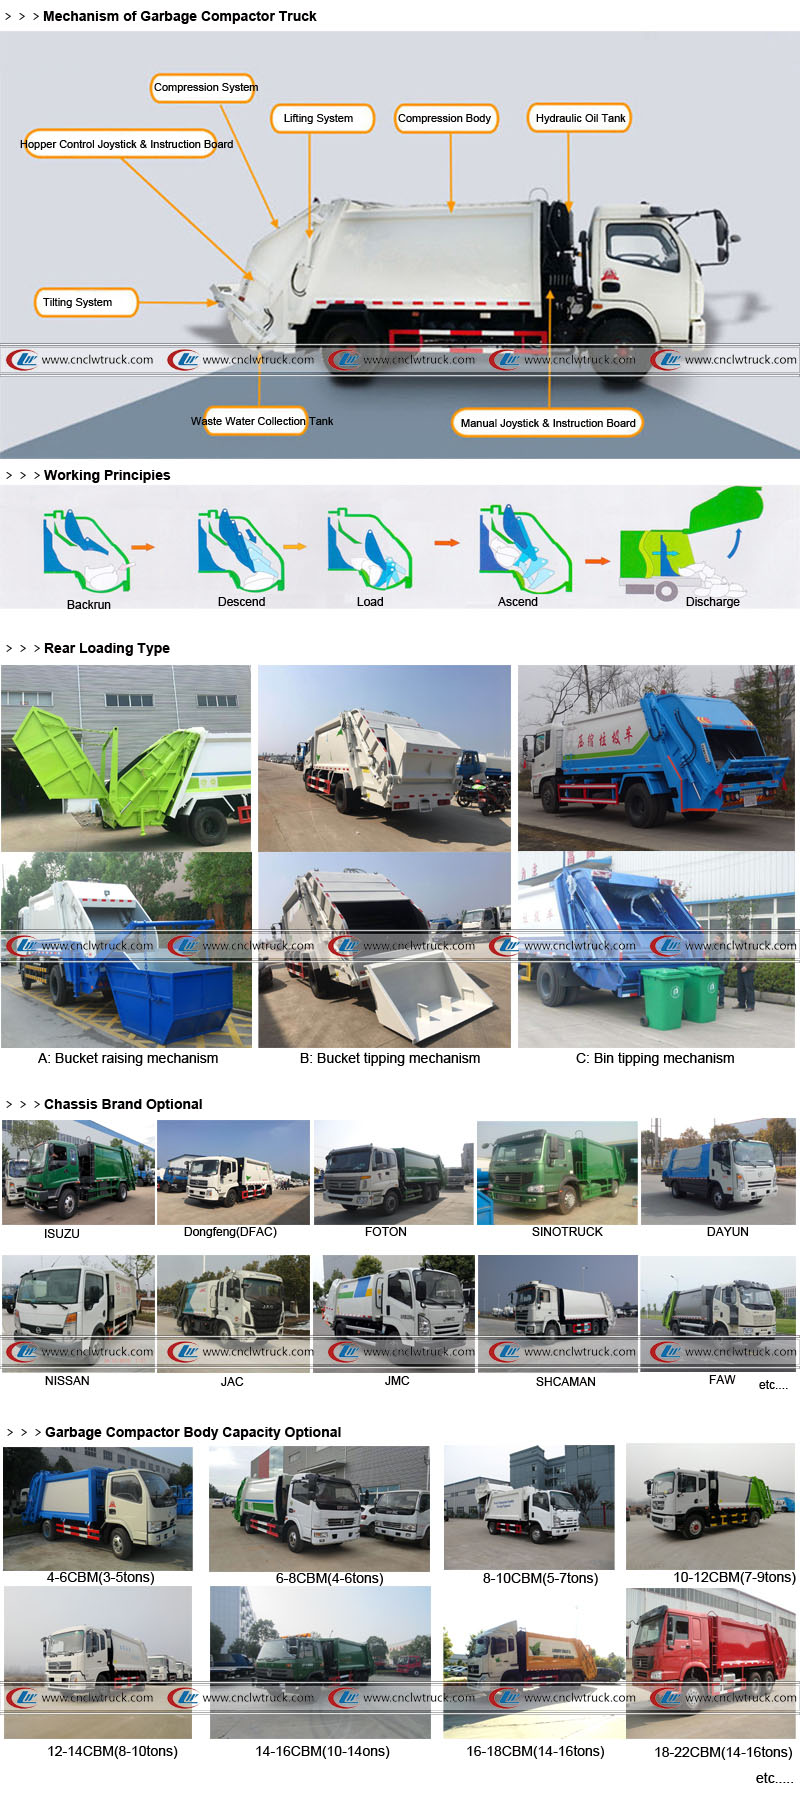 1.garbage compactor truck structure-logo